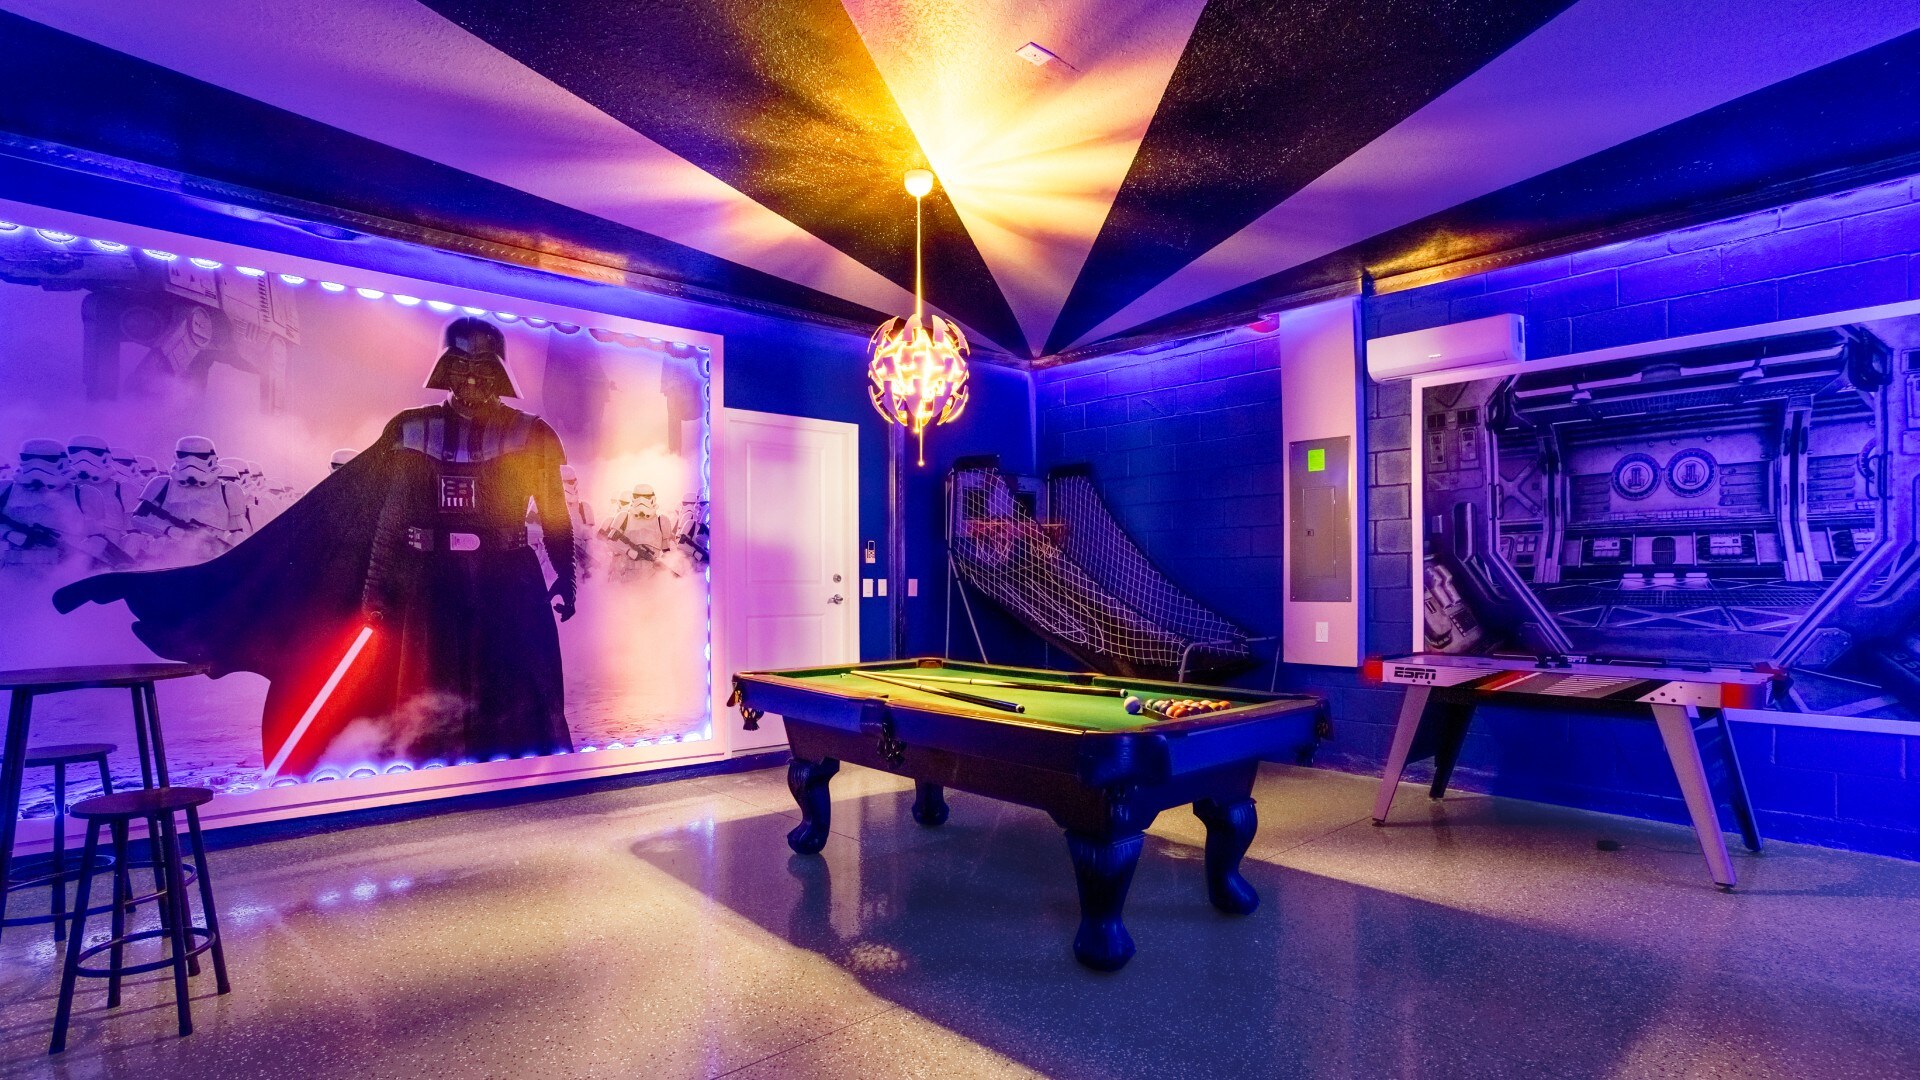 The game room is stylishly furnished with Star Wars theme with cool lights